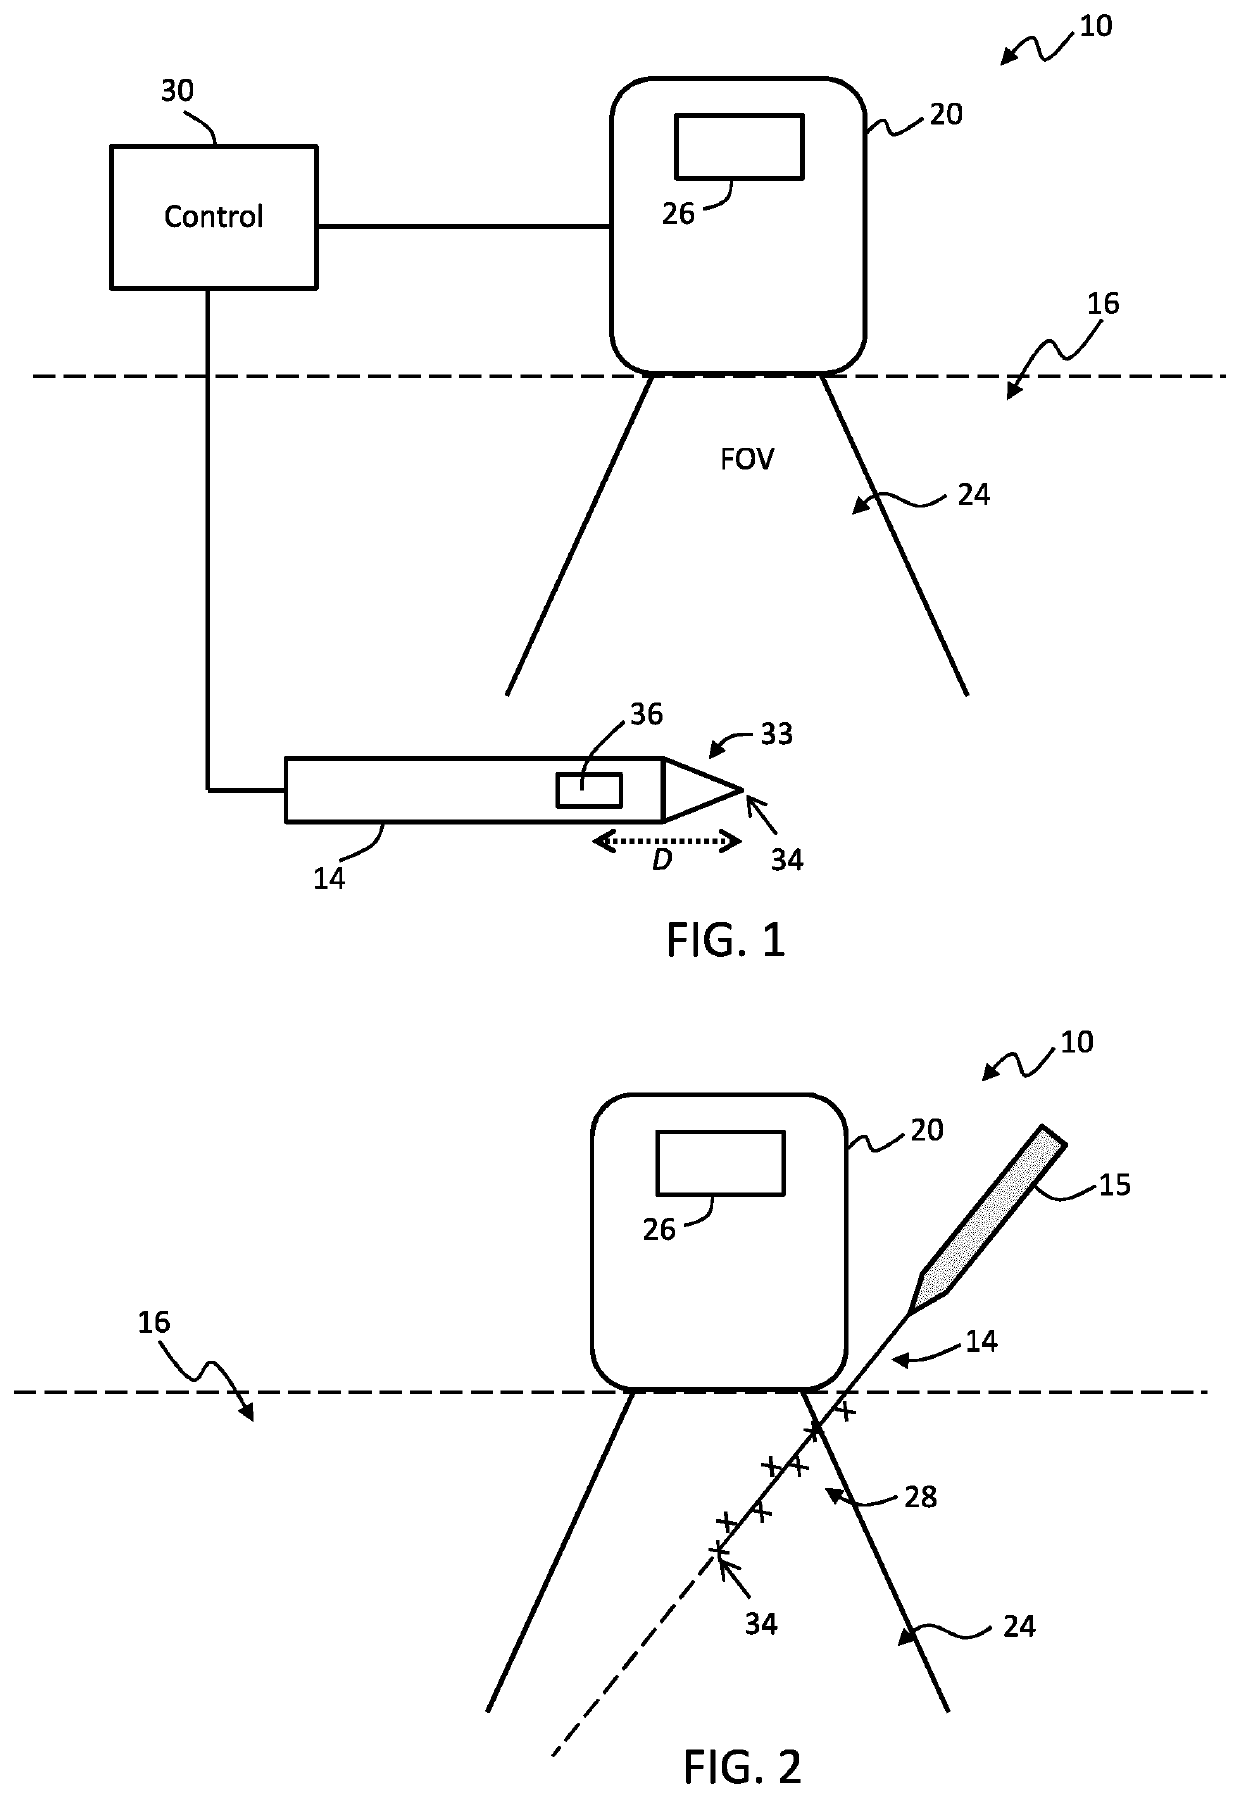 Ultrasound system and method for tracking movement of an object